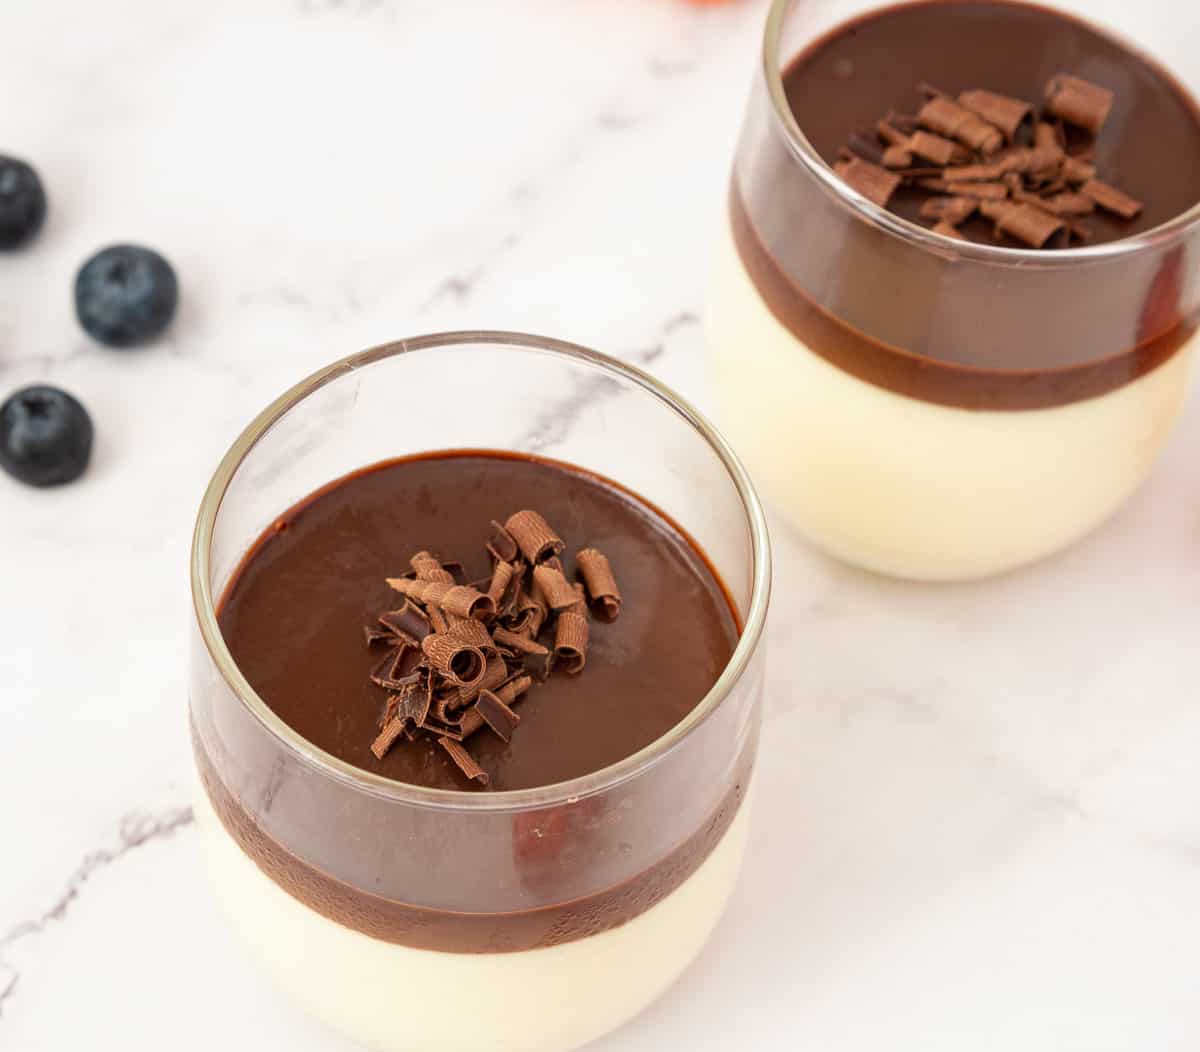 Creme Bavarios topped with chocolate sauce.